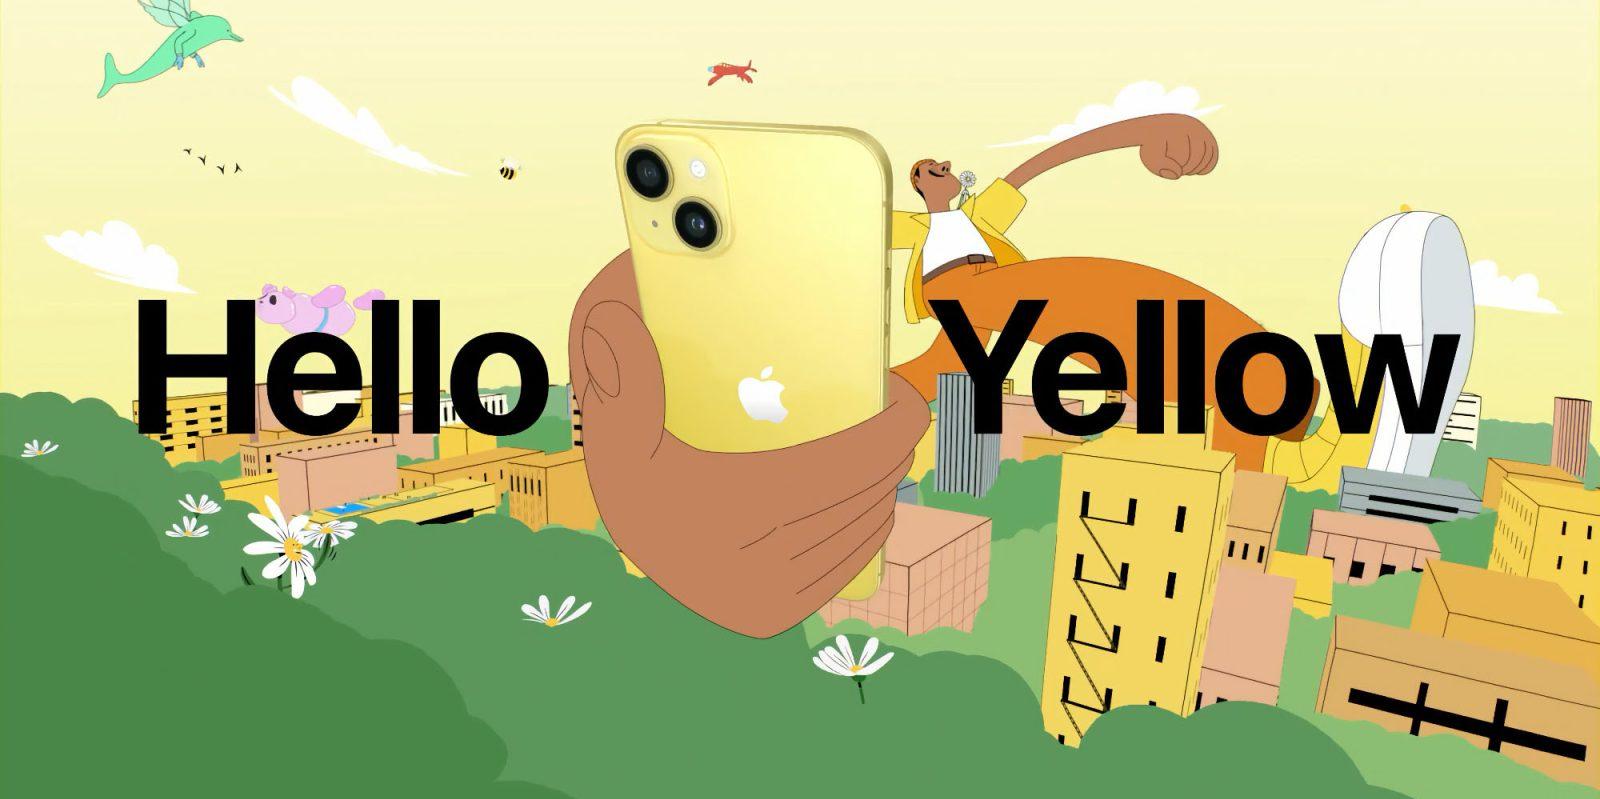 Apple Celebrates Yellow iPhone Launch With New Hello